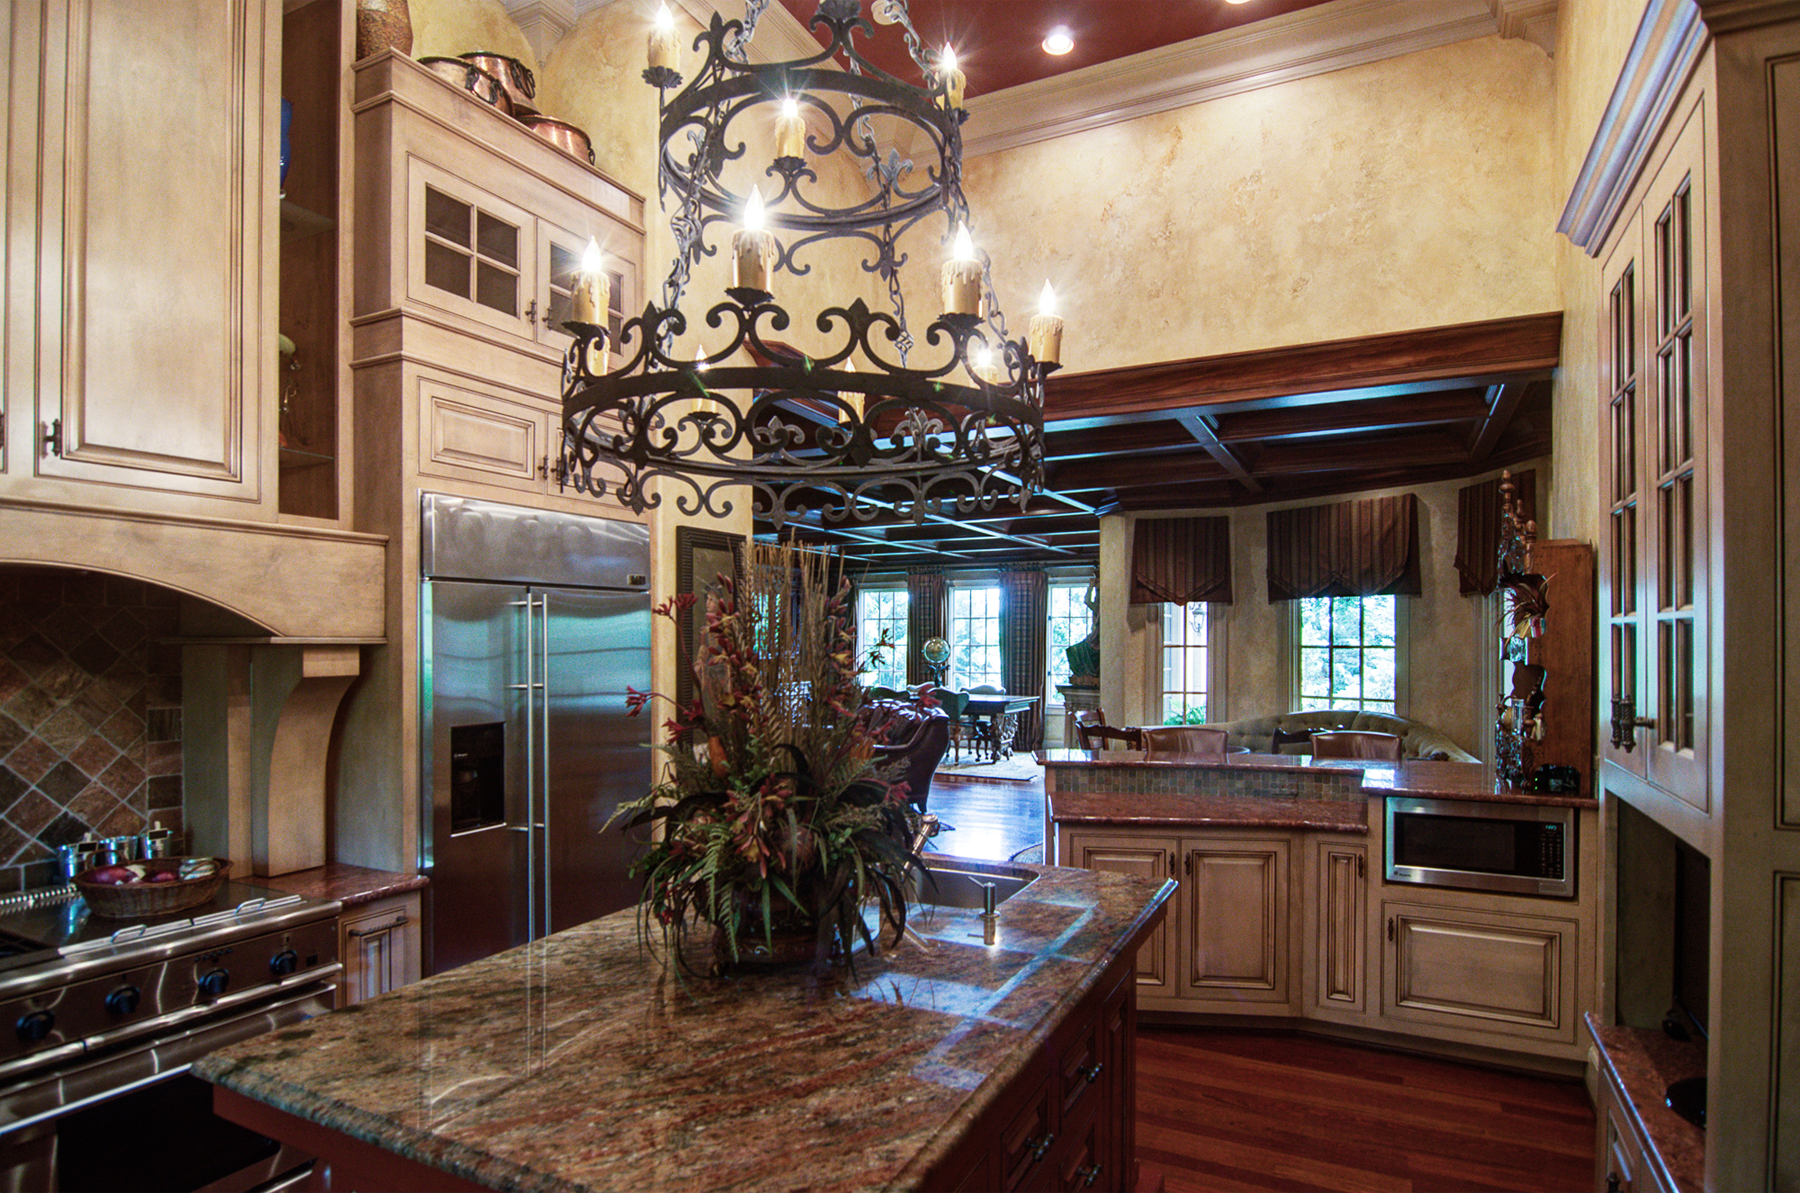 Tuscan plaster walls are perfect with warm colored cabinet glazing in this Brentwood client’s kitchen. Stunning!